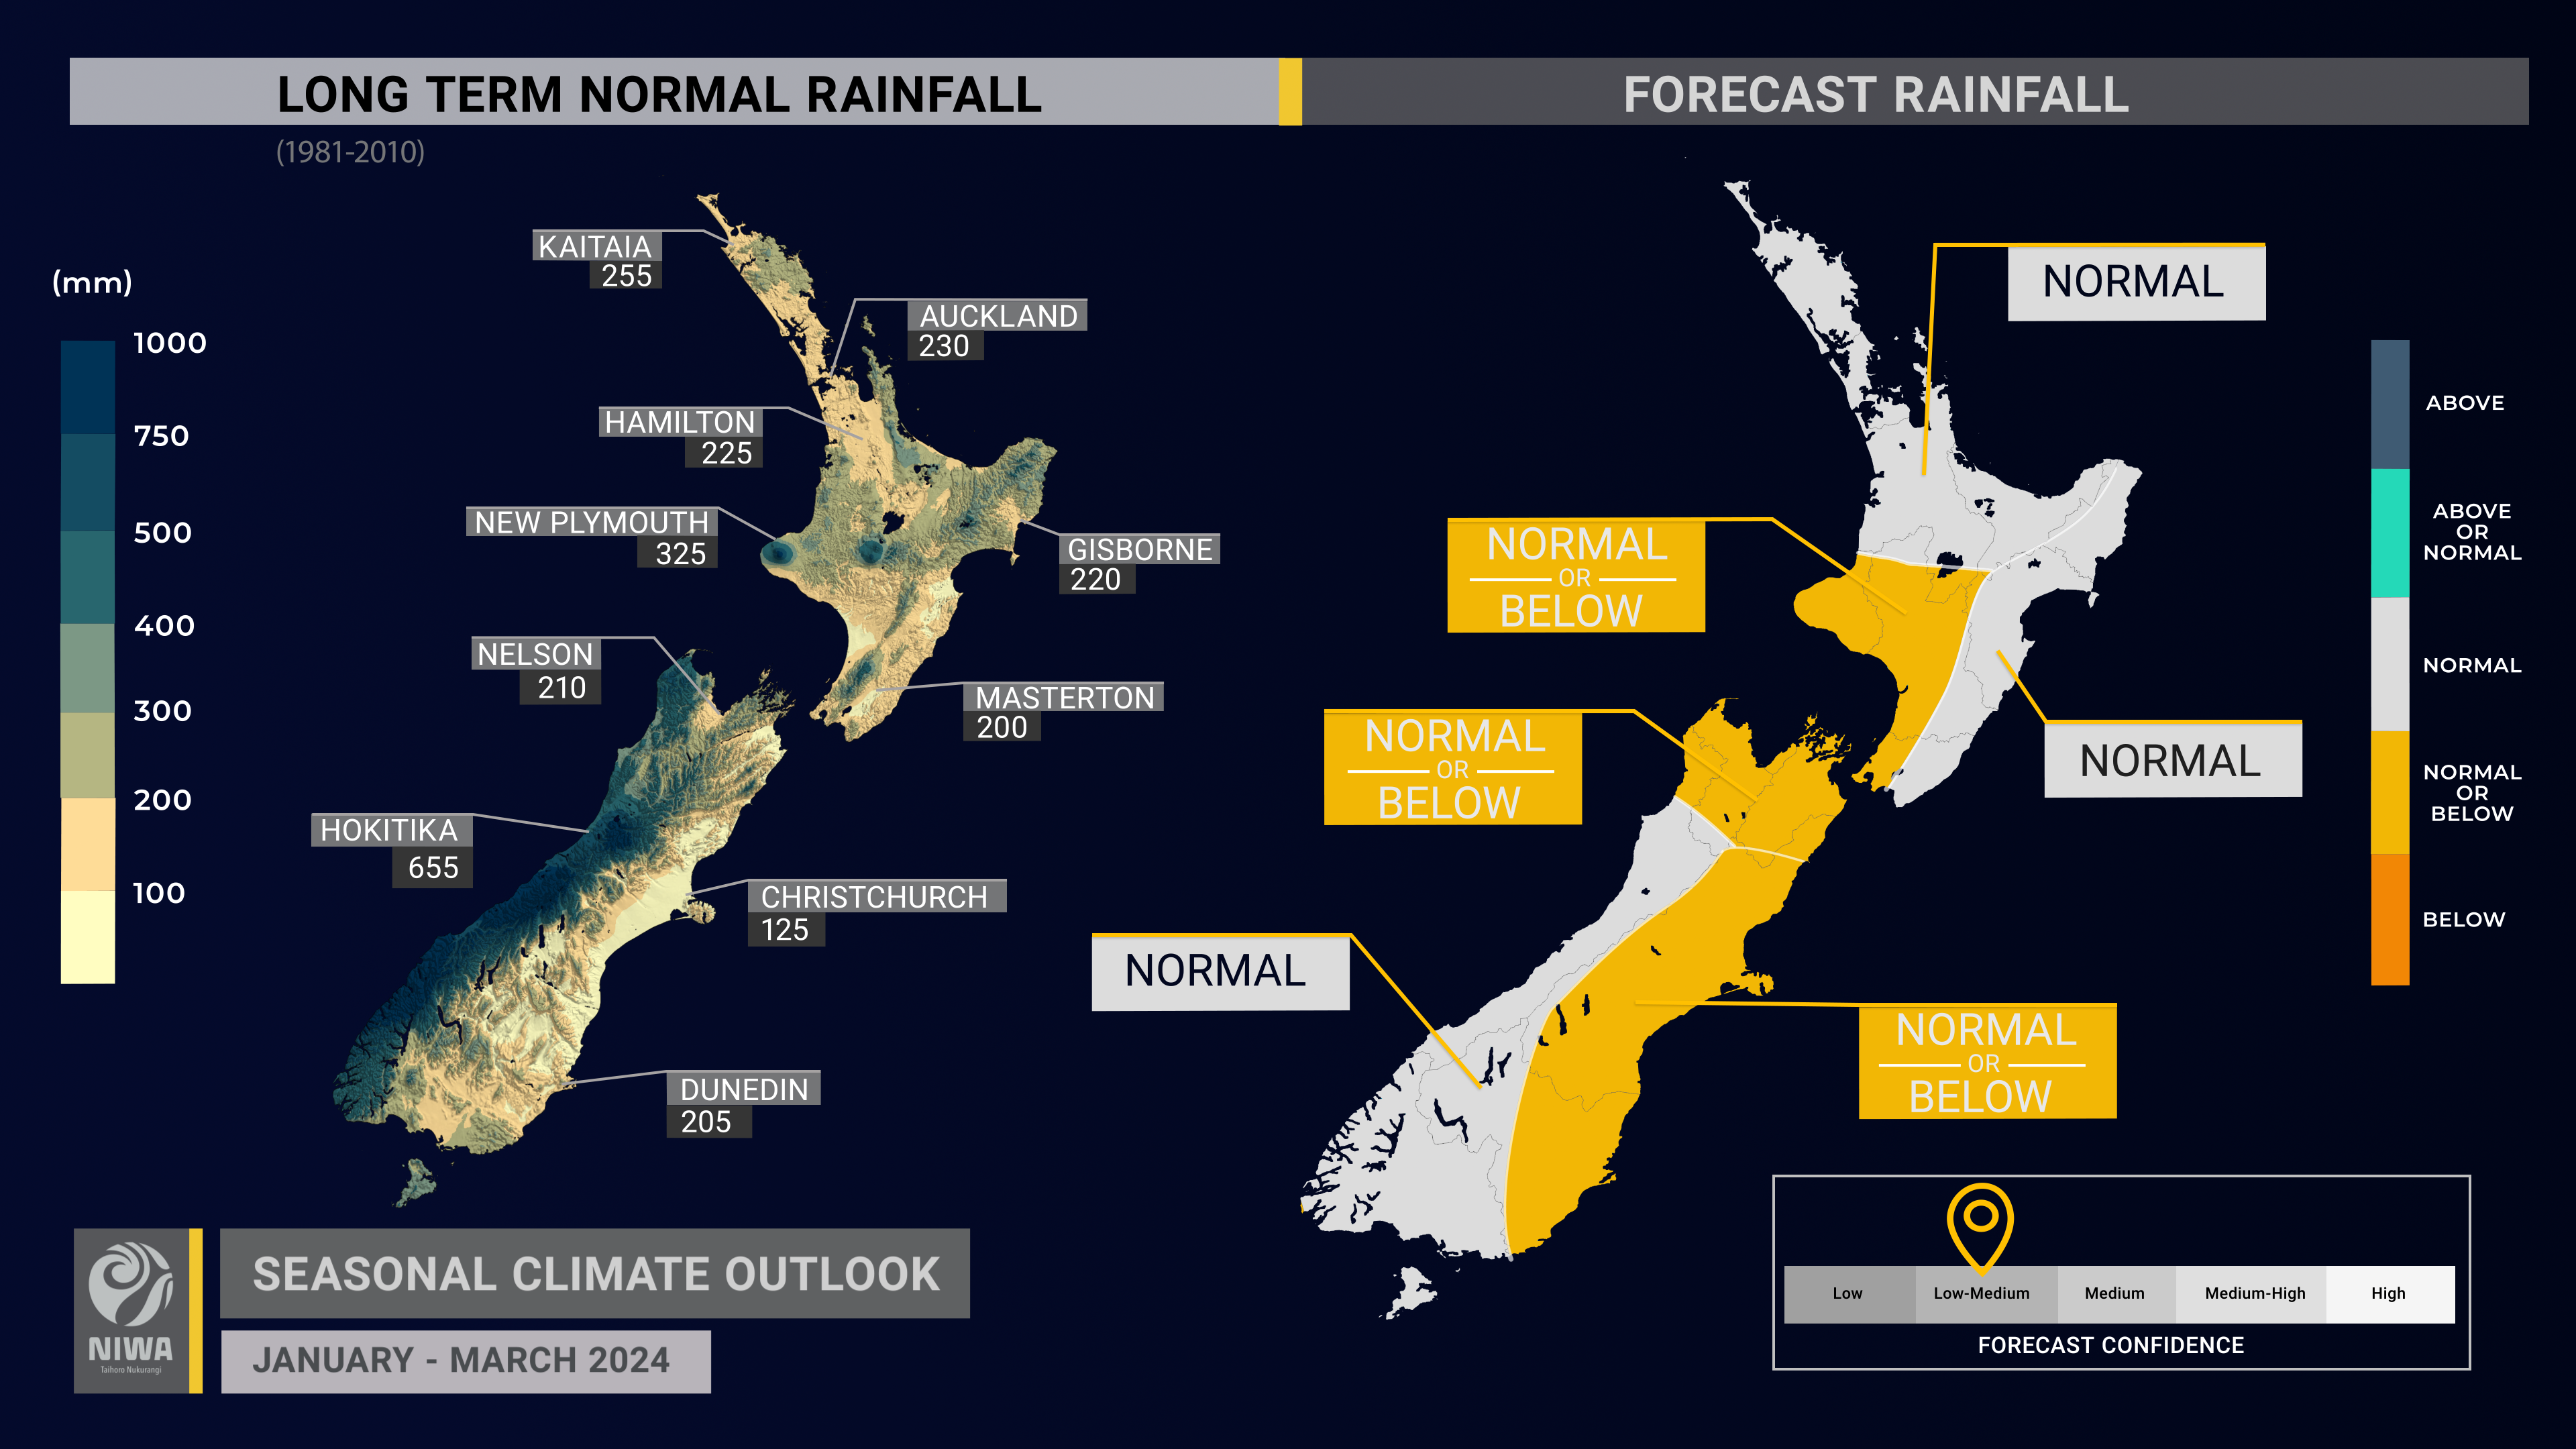 Side by side maps of long term normal rainfall and forecast rainfall in New Zealand.